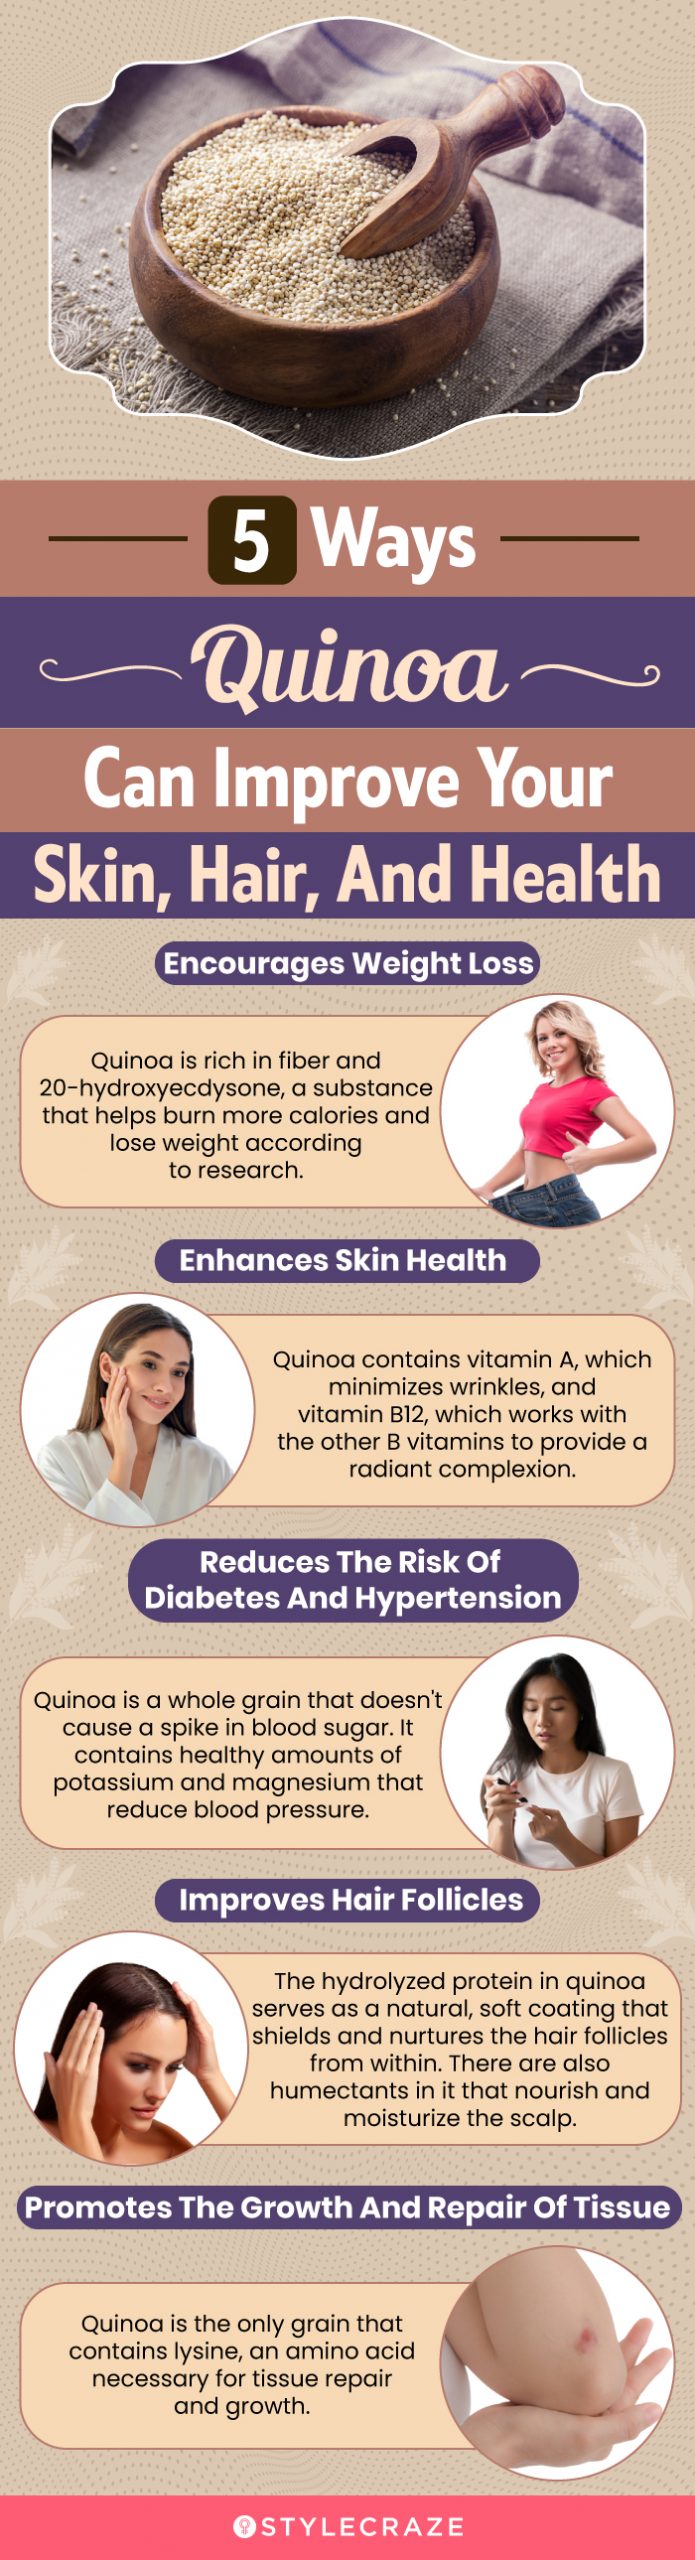 Quinoa Nutrition Health Benefits Uses for Skin  Hair Recipes